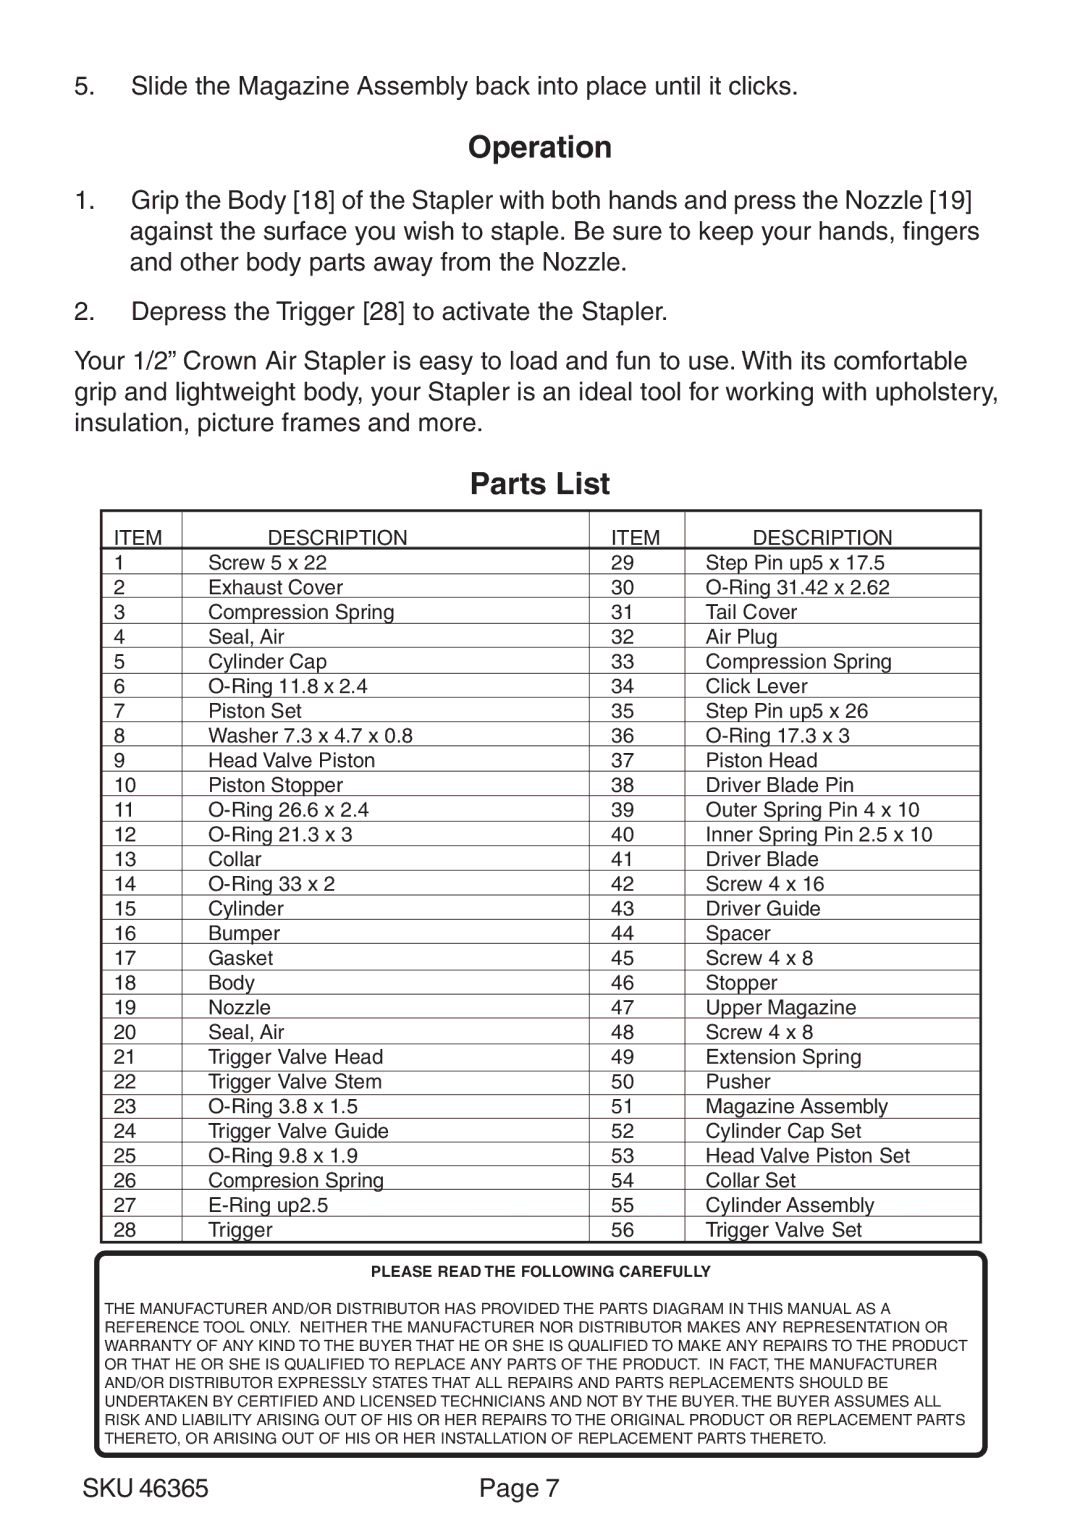 Harbor Freight Tools 46365 operating instructions Operation, Parts List 